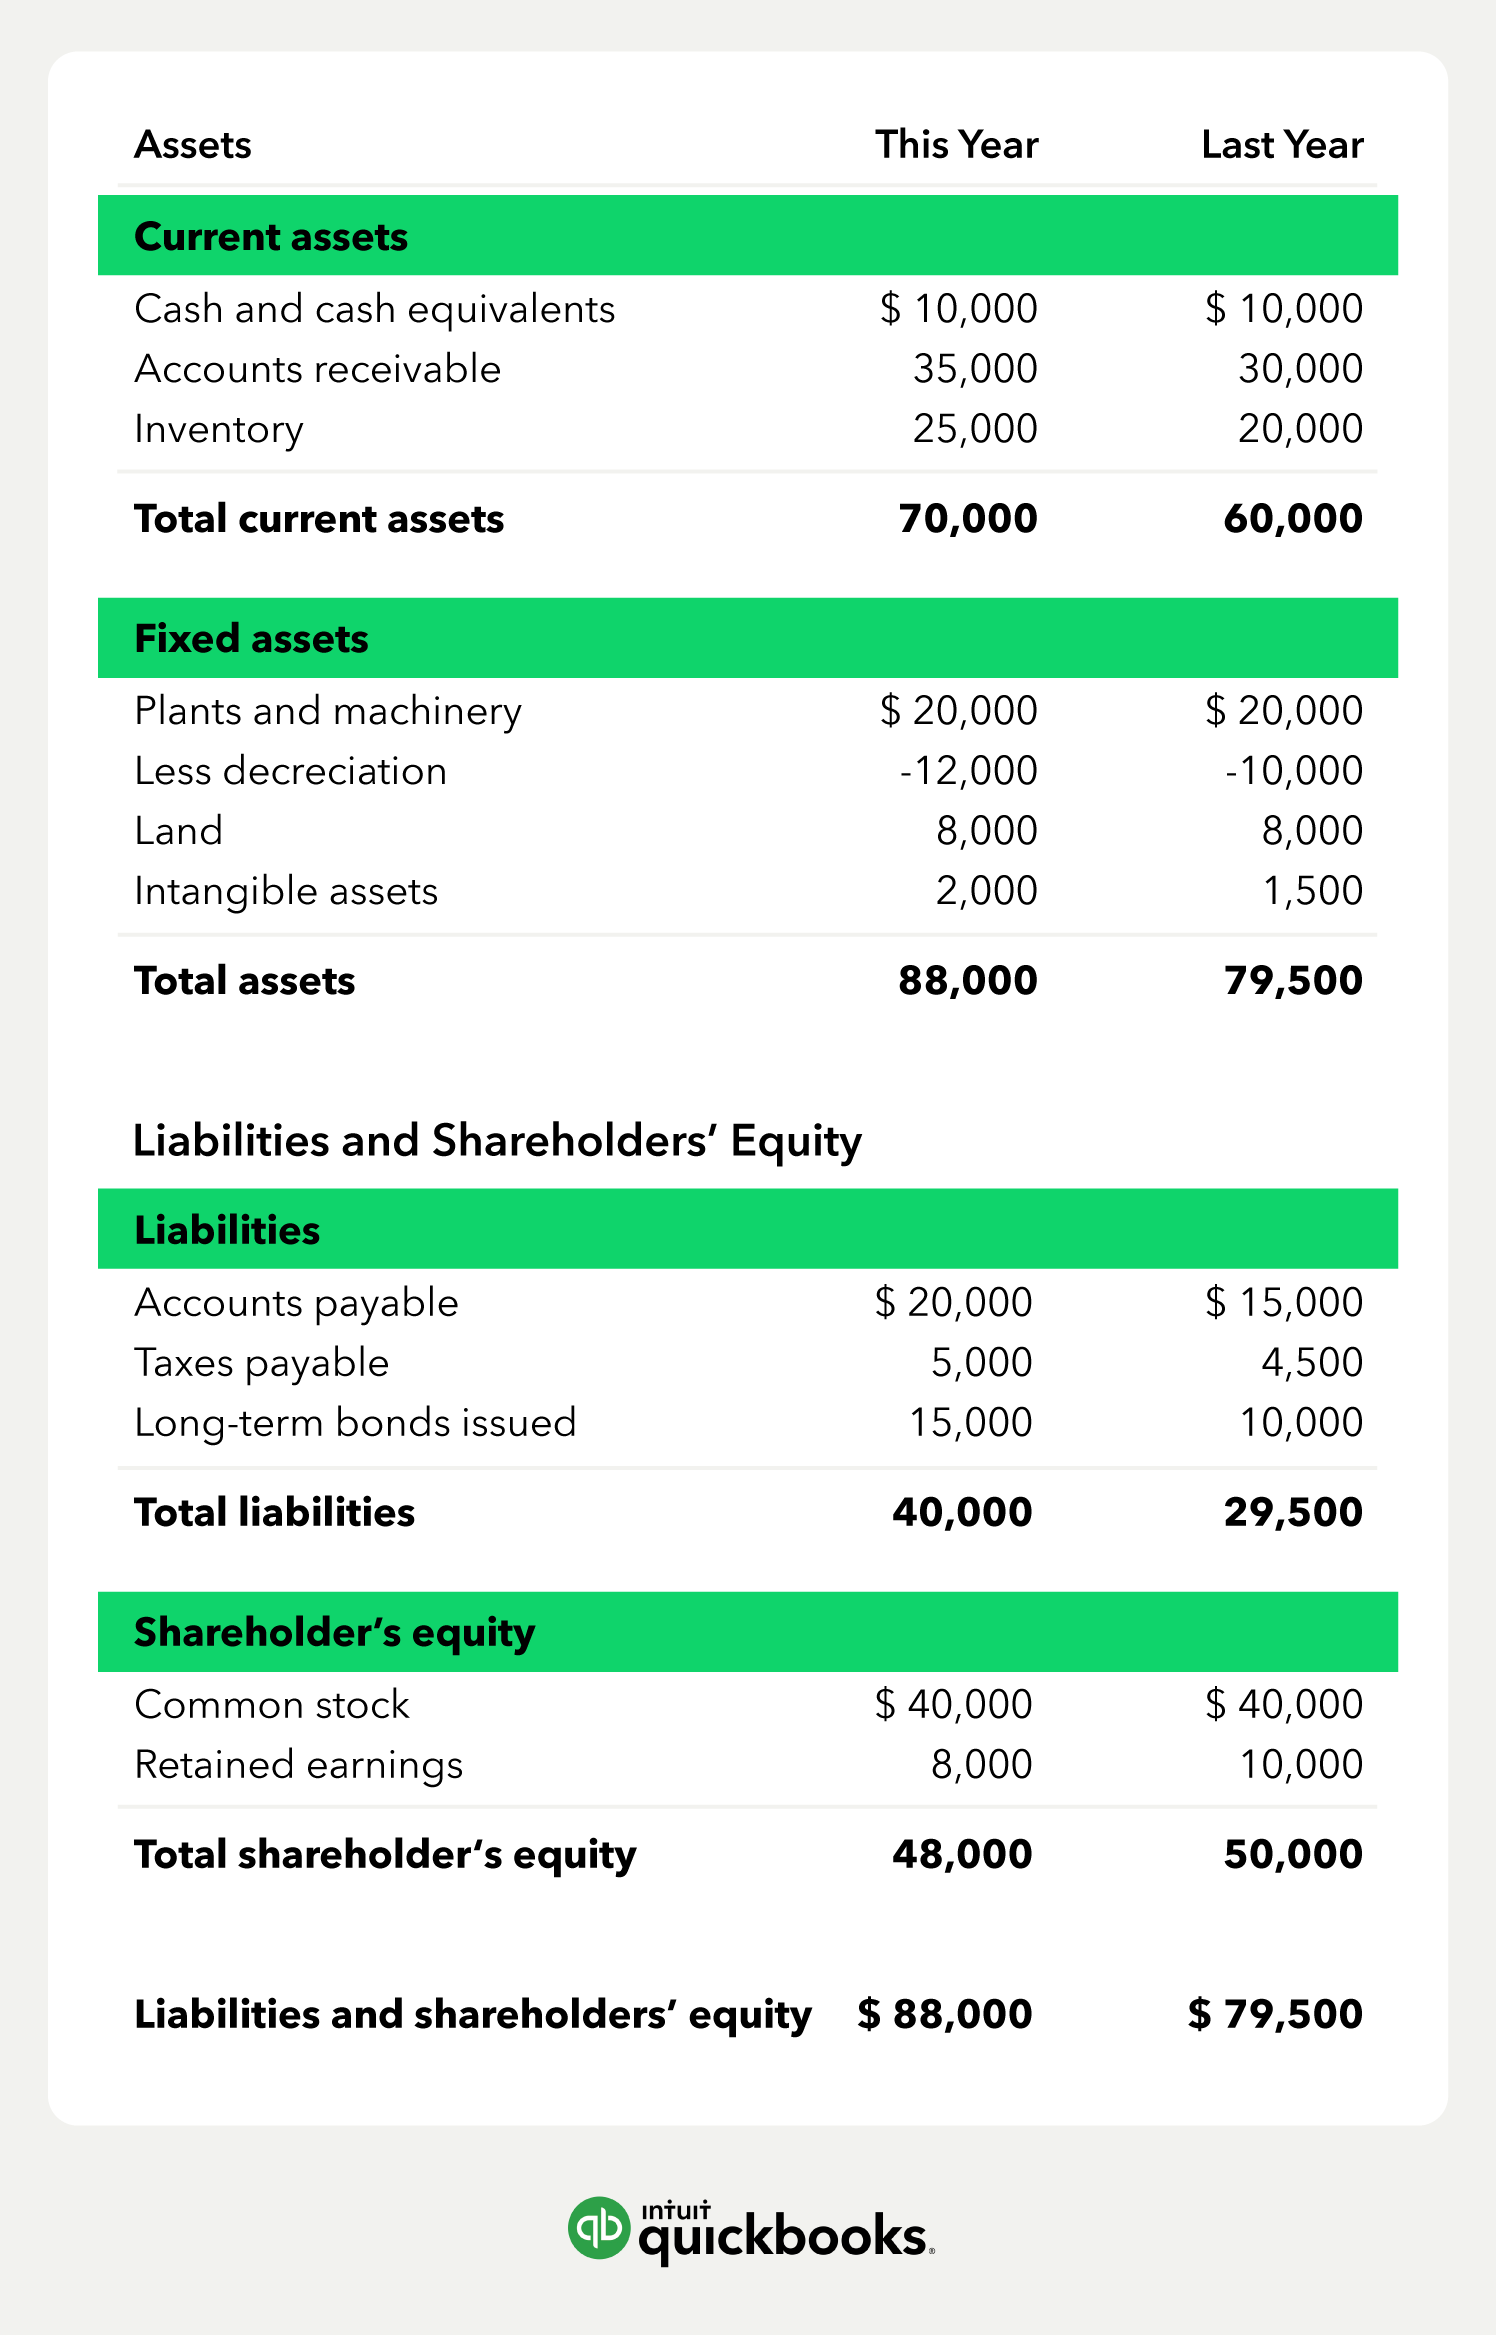 A sample balance sheet (same as above) shows assets in columns comparing this year and last year. Under assets, the statement includes current assets (cash and cash equivalents, accounts receivable, inventory), and fixed assets (plants and machinery, less depreciation, land, intangible assets). Under liabilities and shareholders’ equity are liabilities (accounts payable, taxes payable, long-term bonds issued) and shareholder’s equity (common stock, retained earnings).